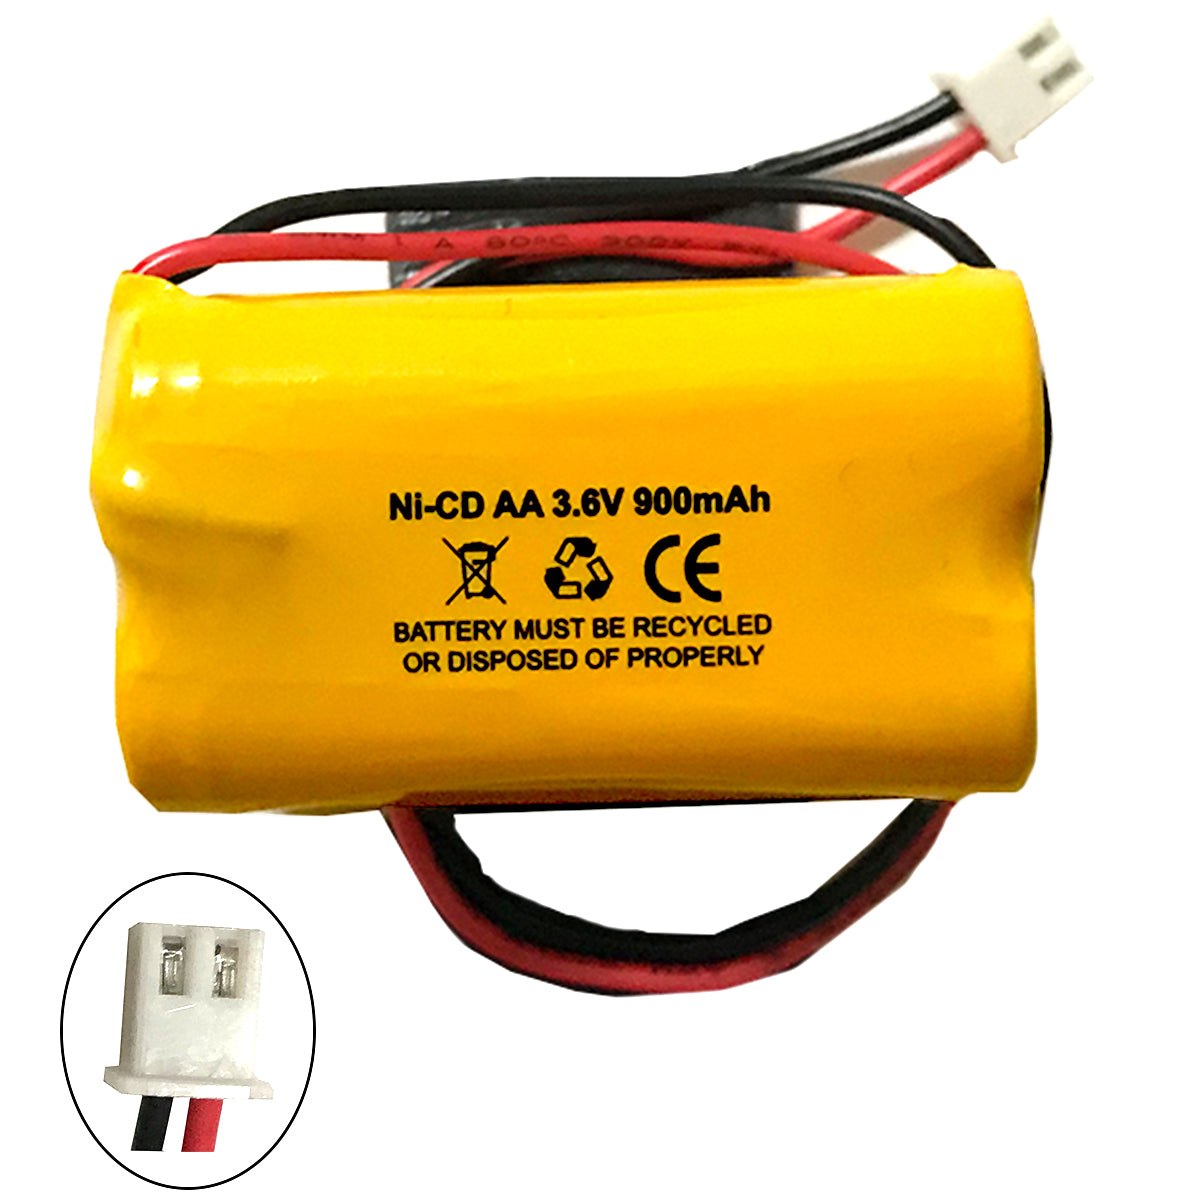 BBAT0063A TOPA Ni-CD AA900mAh 3.6V Battery Replacement for Emergency / Exit  Light